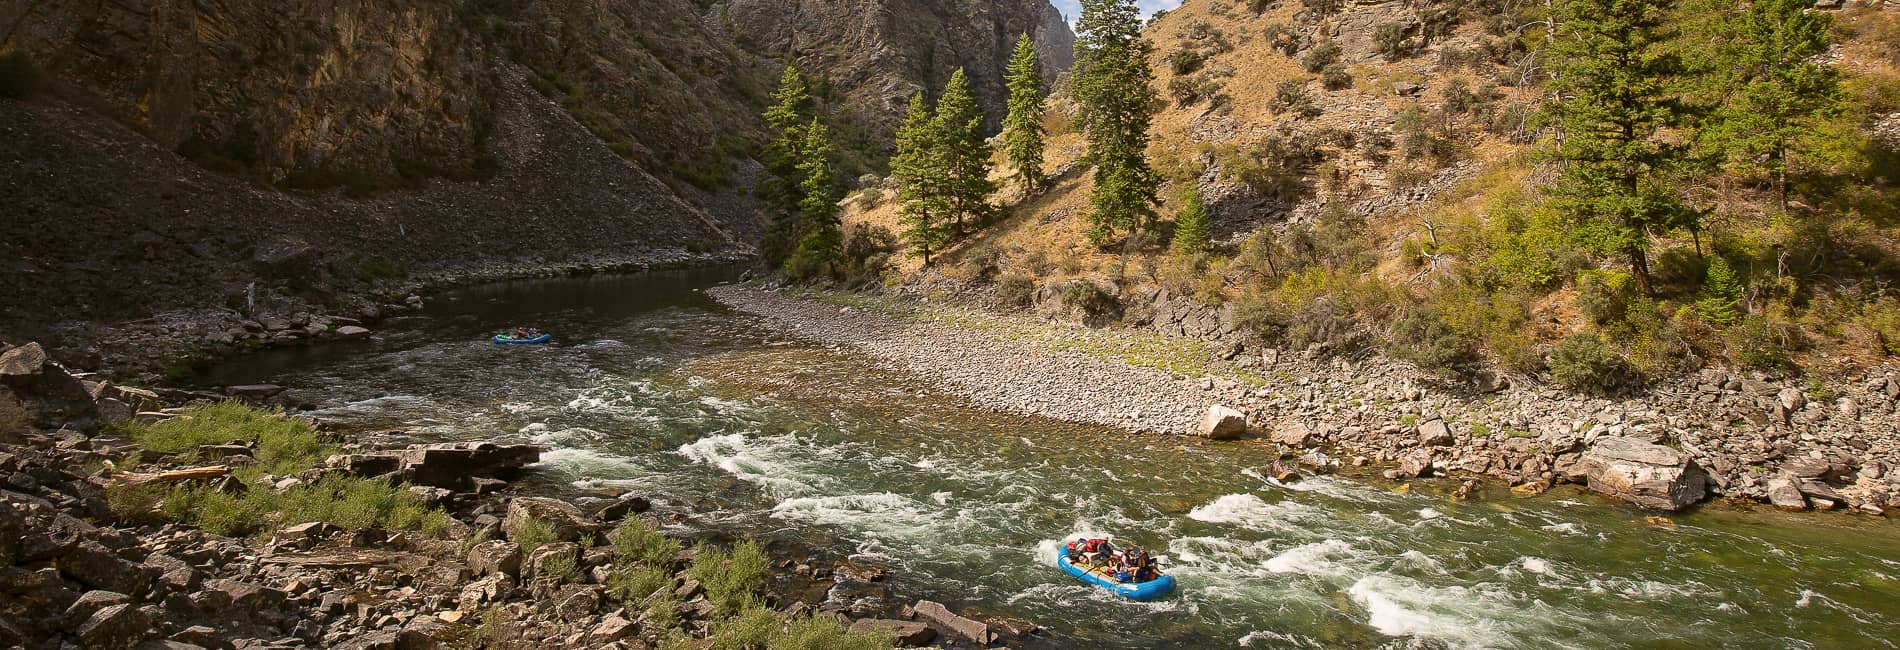 The Middle Fork of the Salmon River - a Comprehenstive Guide [Book]